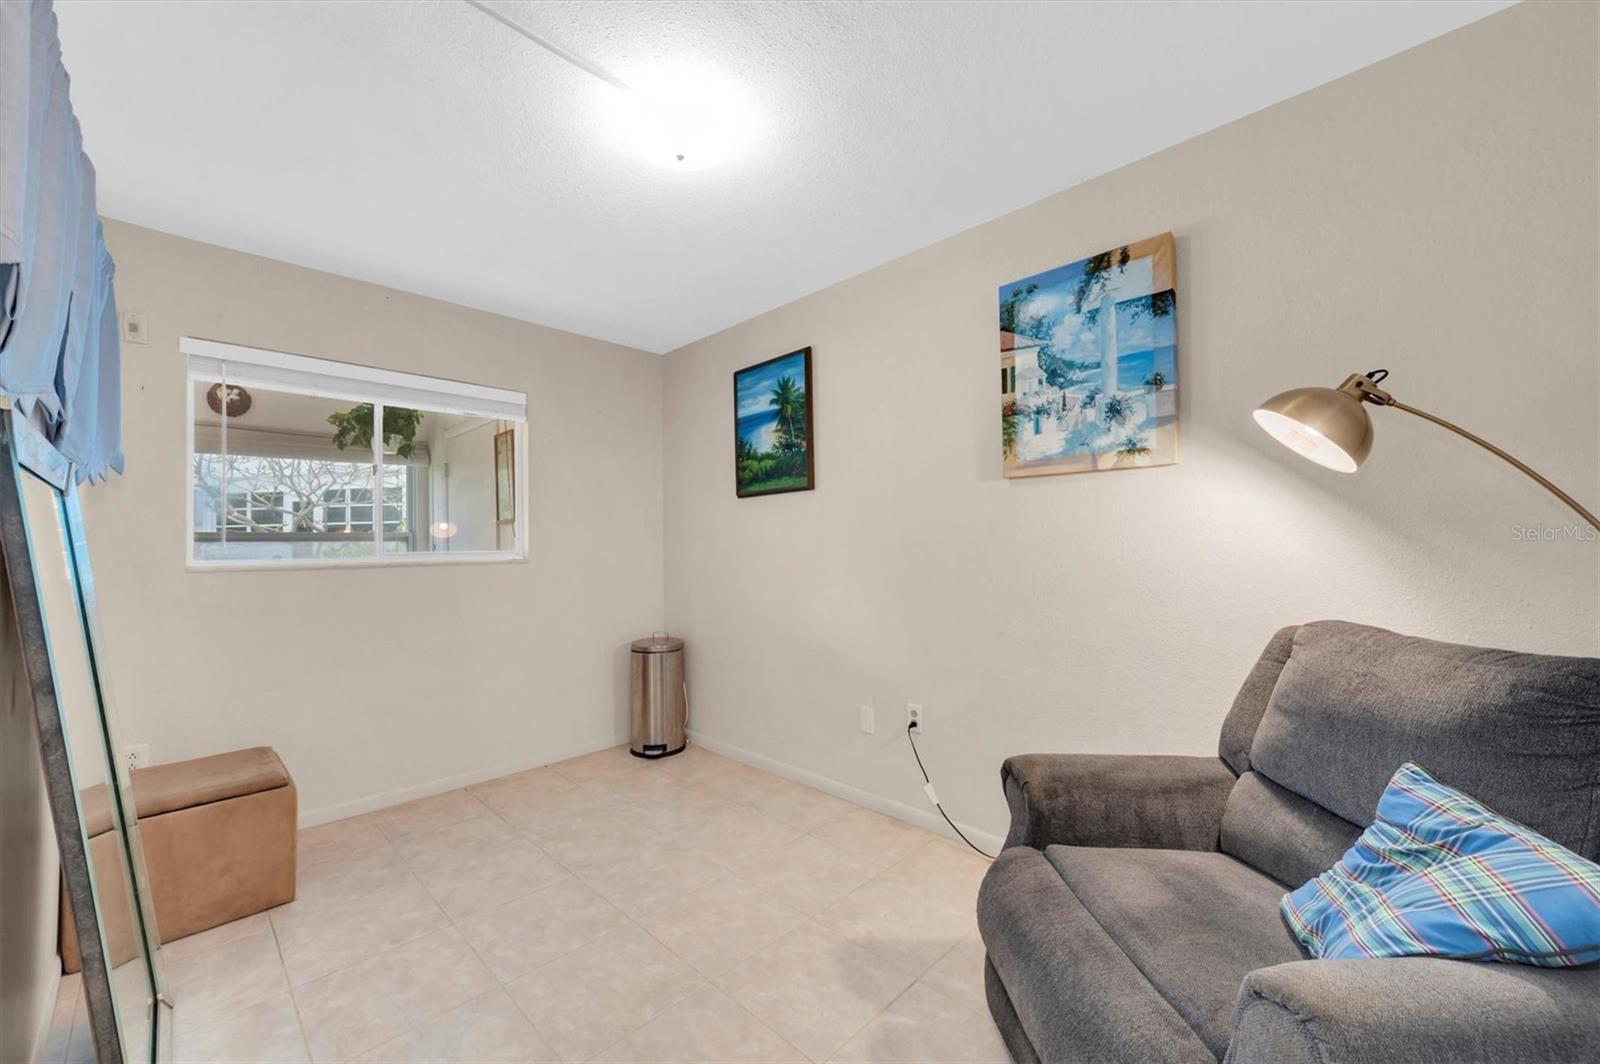 This is the bonus room. The original DELUXE floor plan with the one giant bedroom was modified by a previous owner to create this awesome extra bonus space. Go crazy with it! Craft room, bunkbeds for the grandkids, secondary TV room, office...